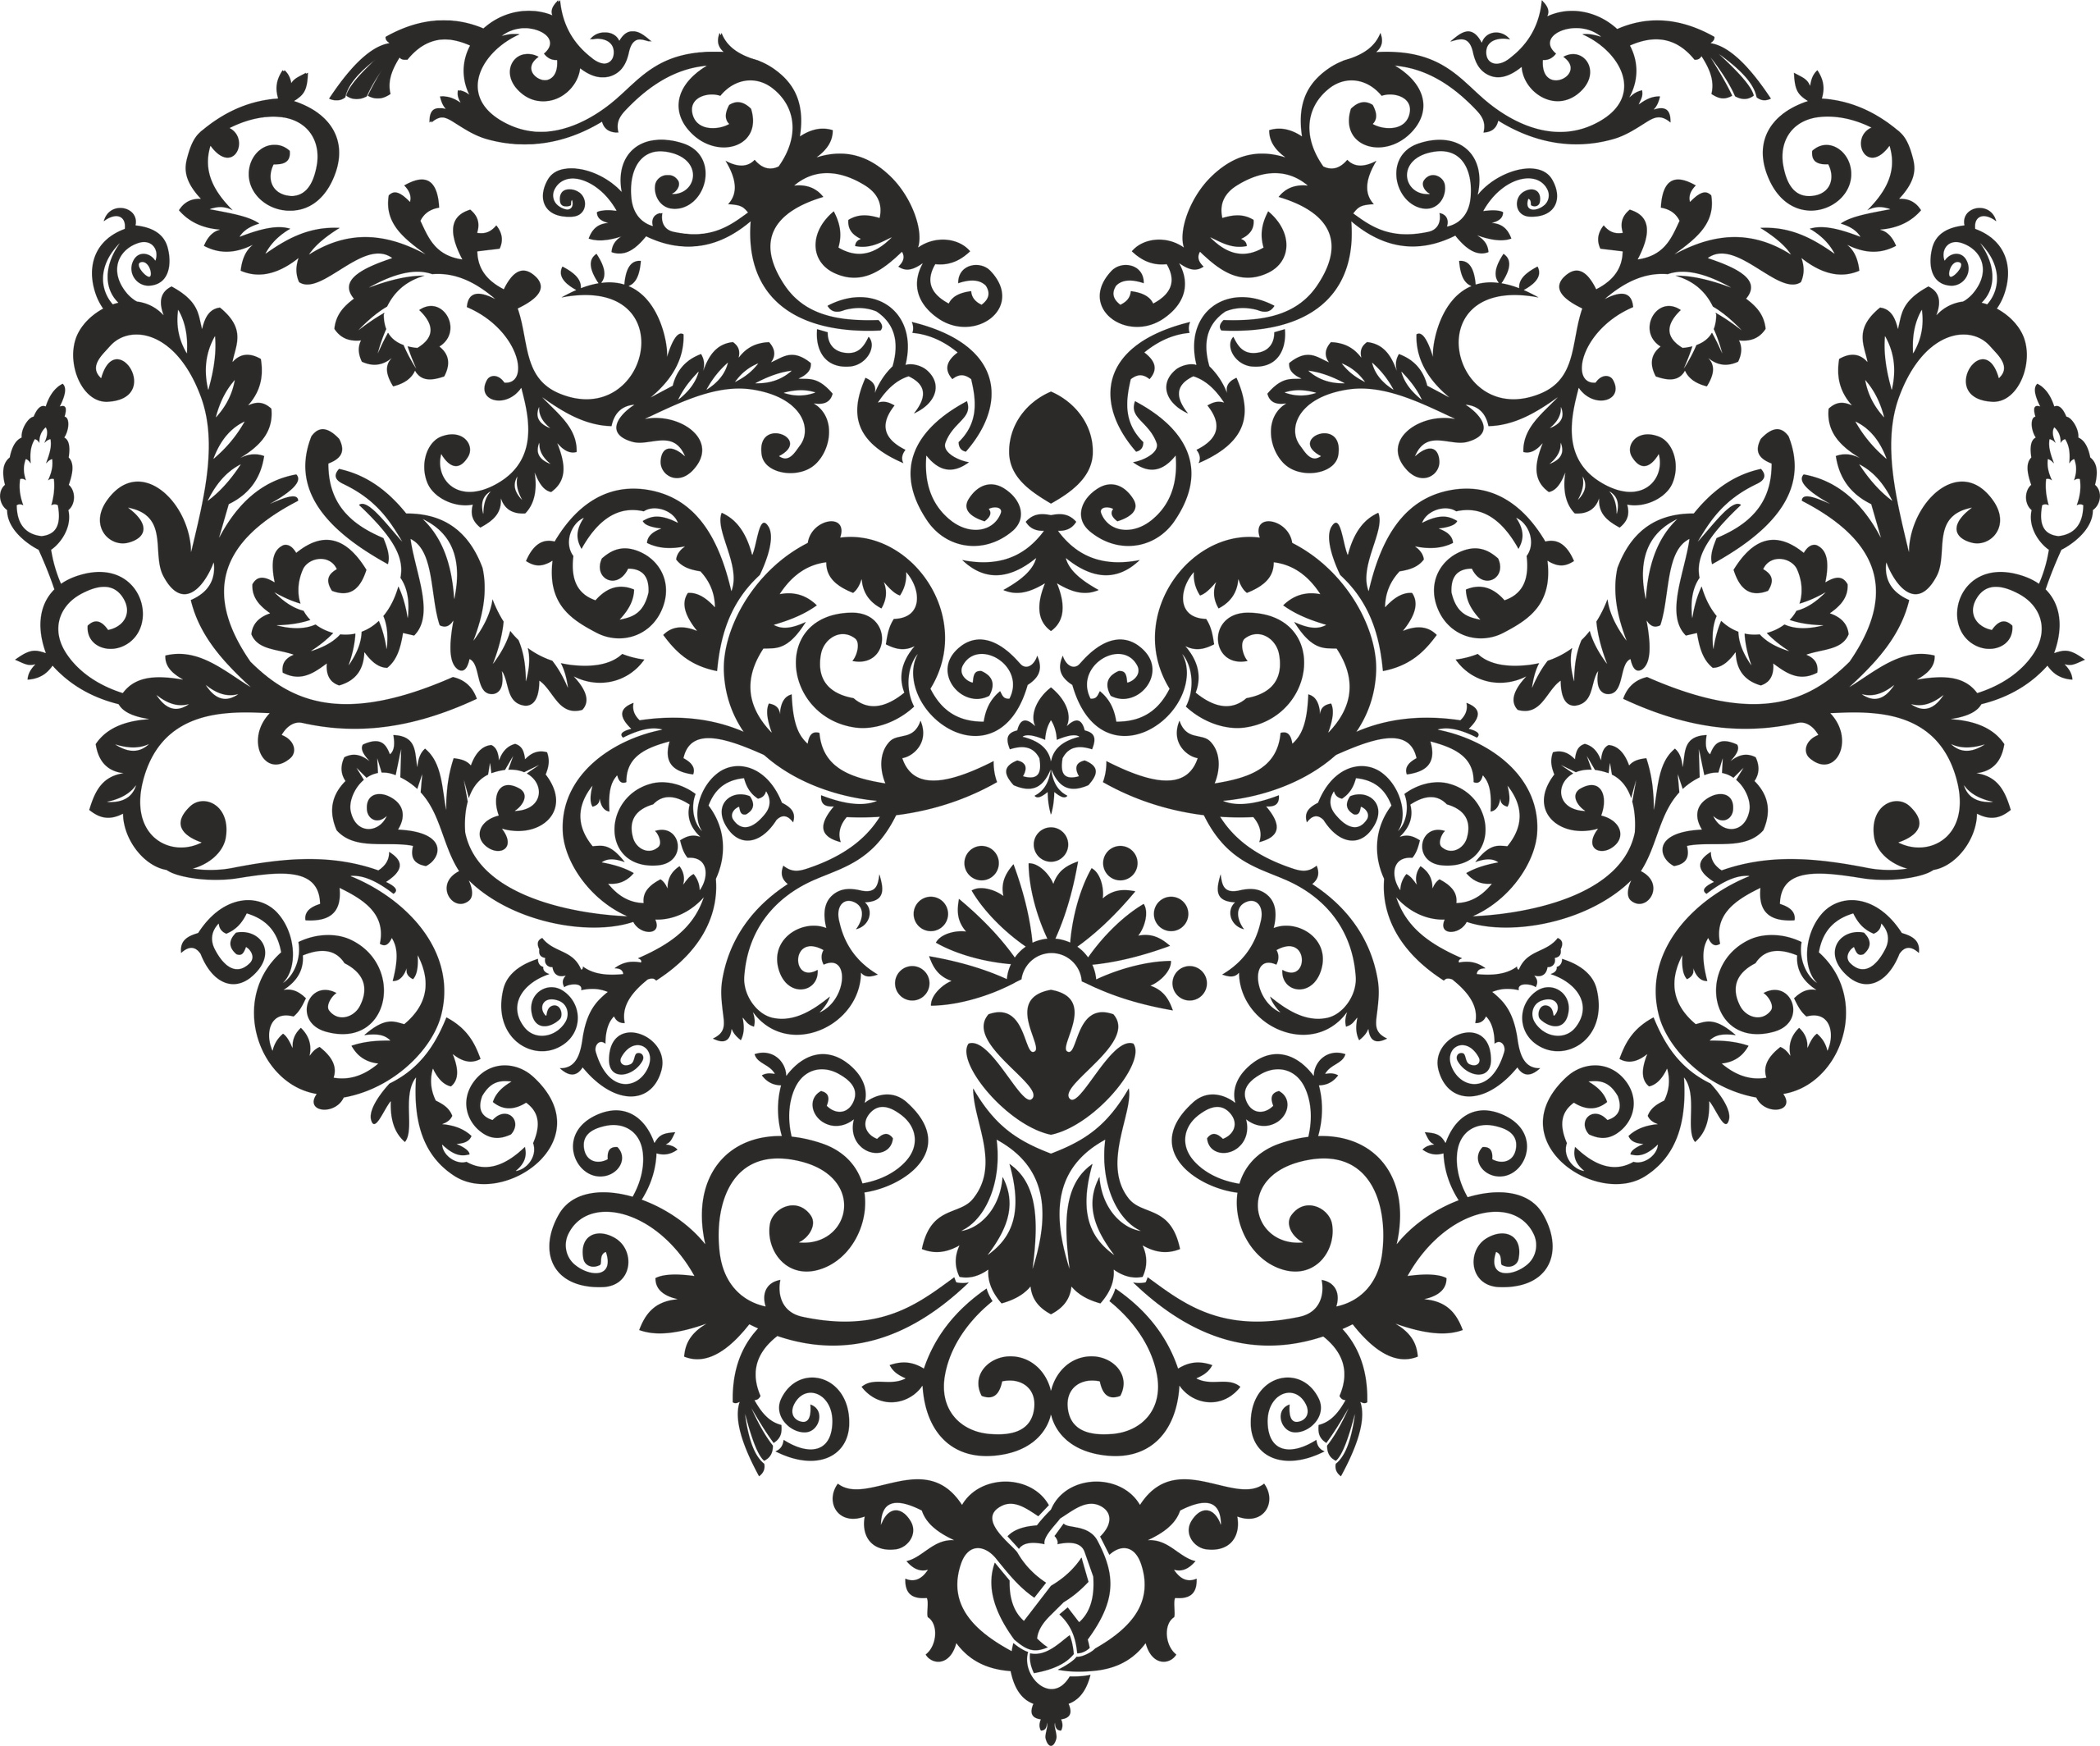 Download Shaped Heart Vector Free Vector cdr Download - 3axis.co